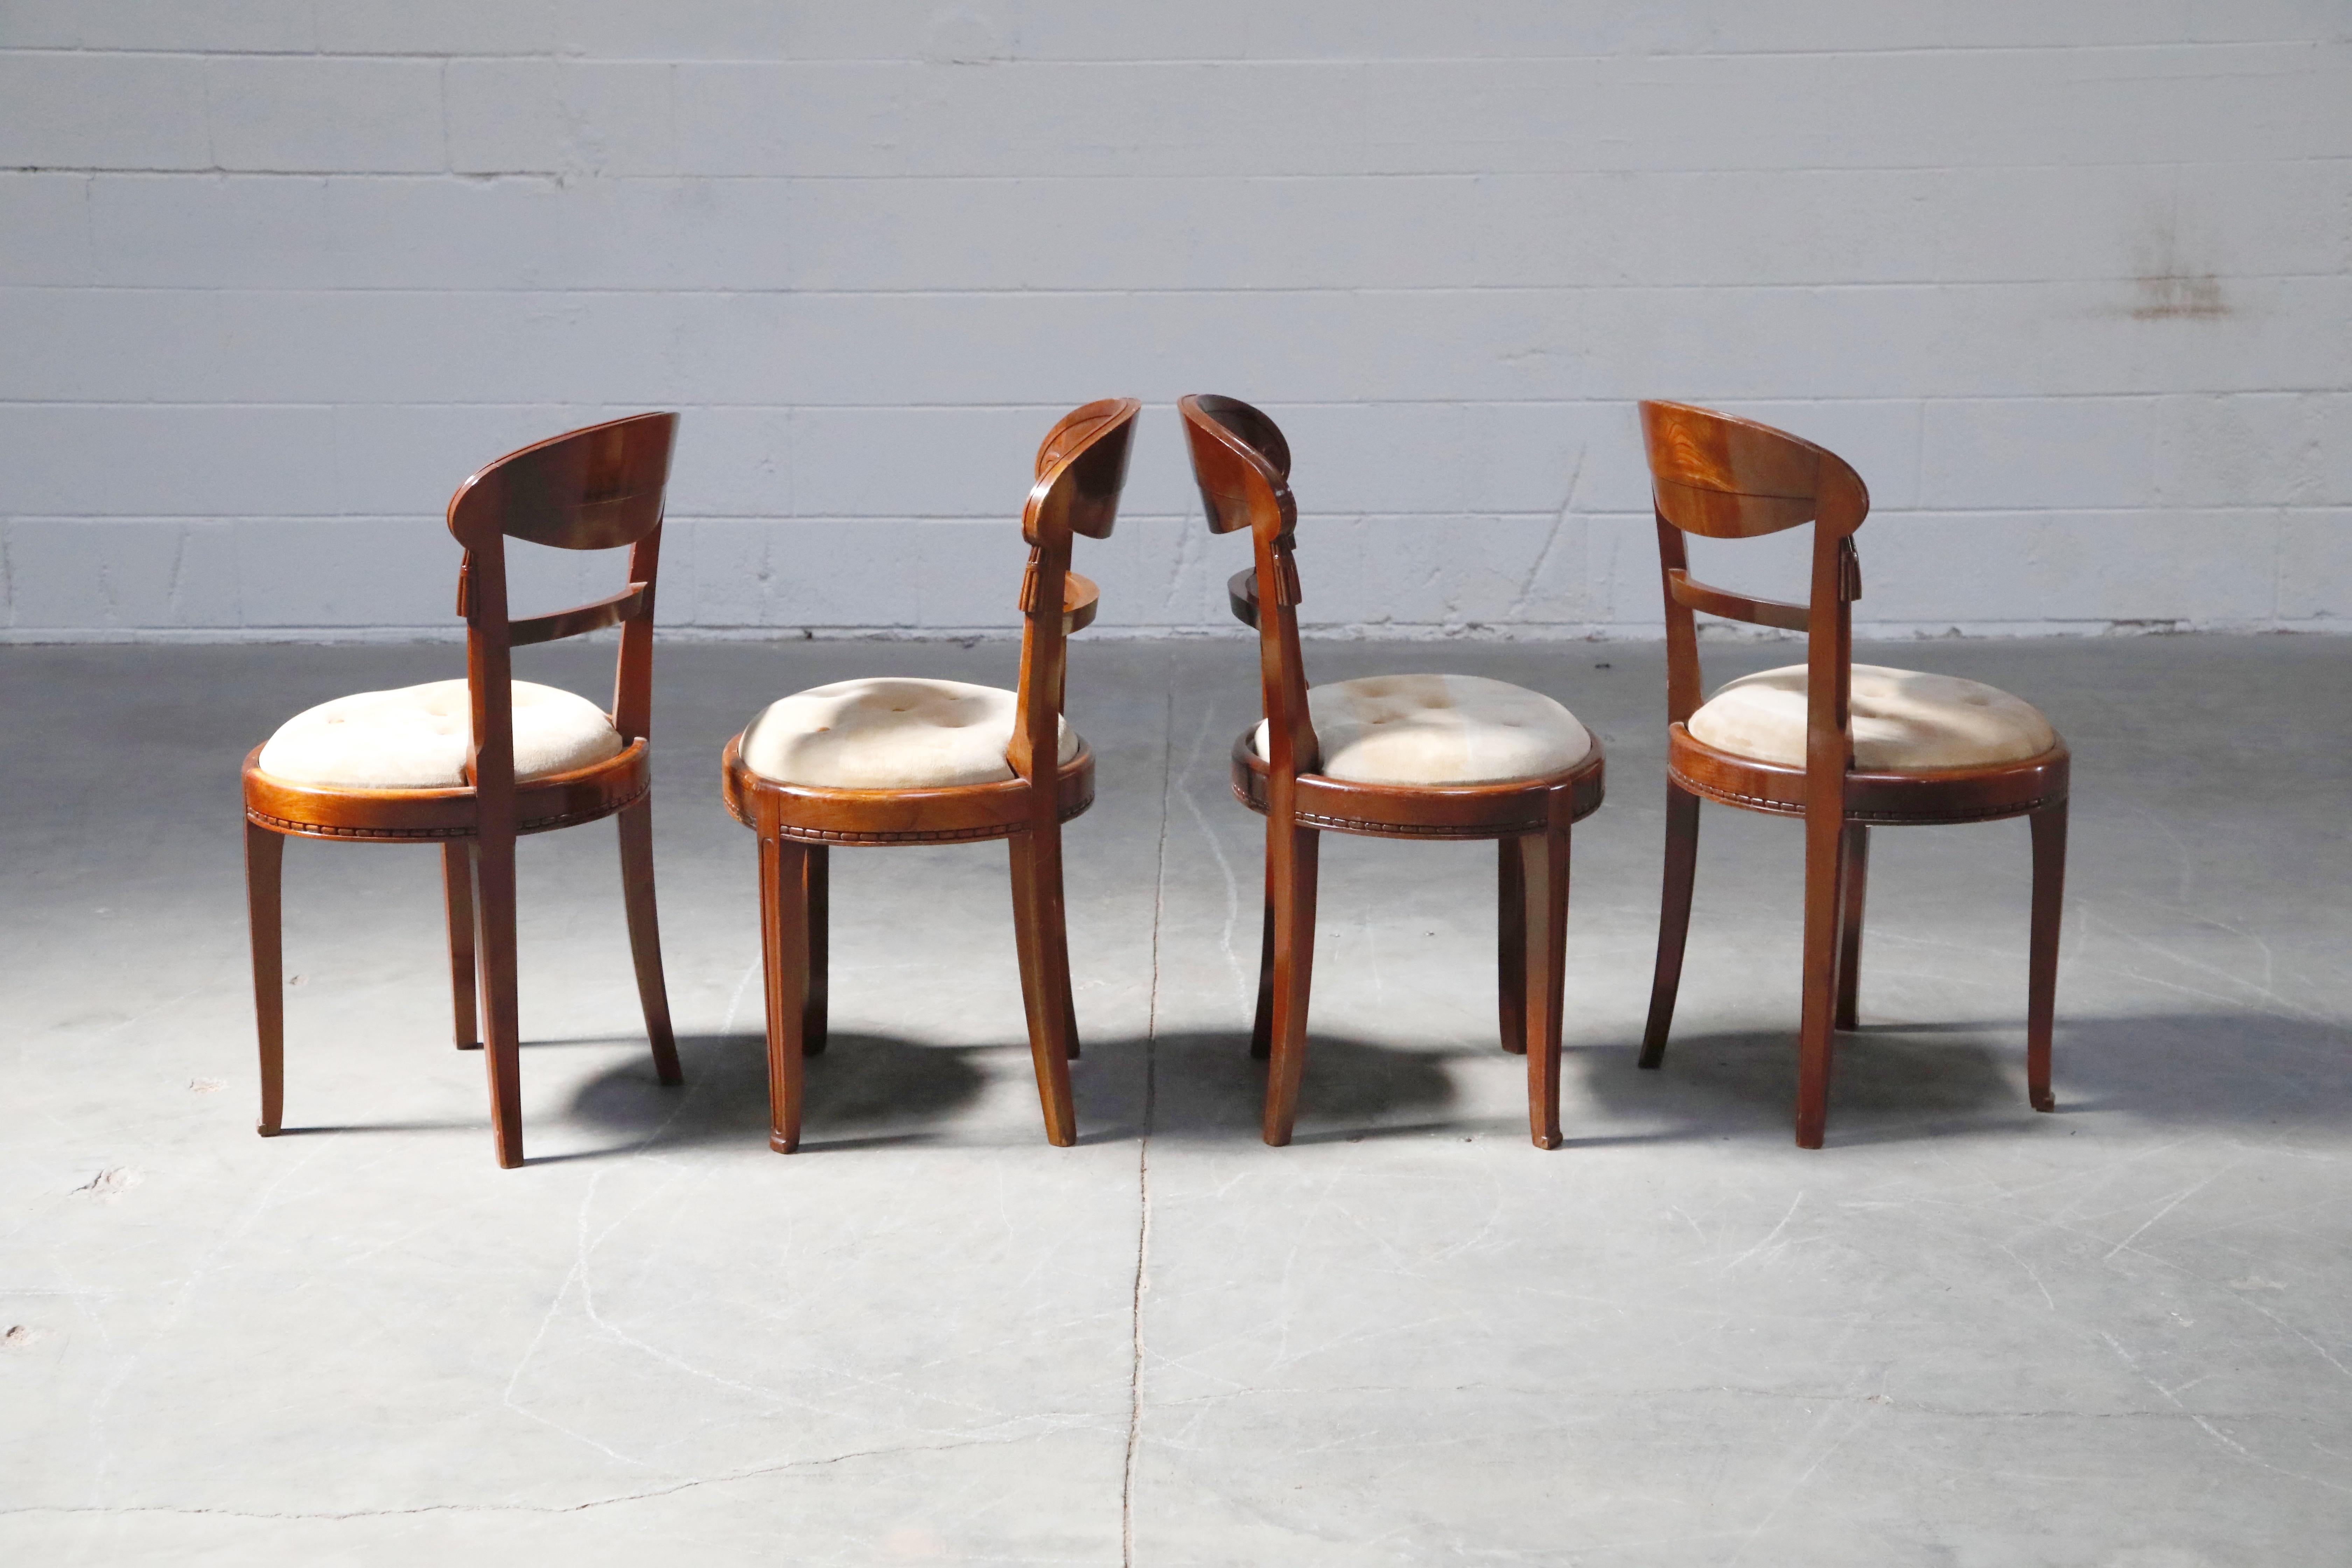 Suede Set of Four French Art Deco Dining Chairs Attributed to Sue et Mare, circa 1920s